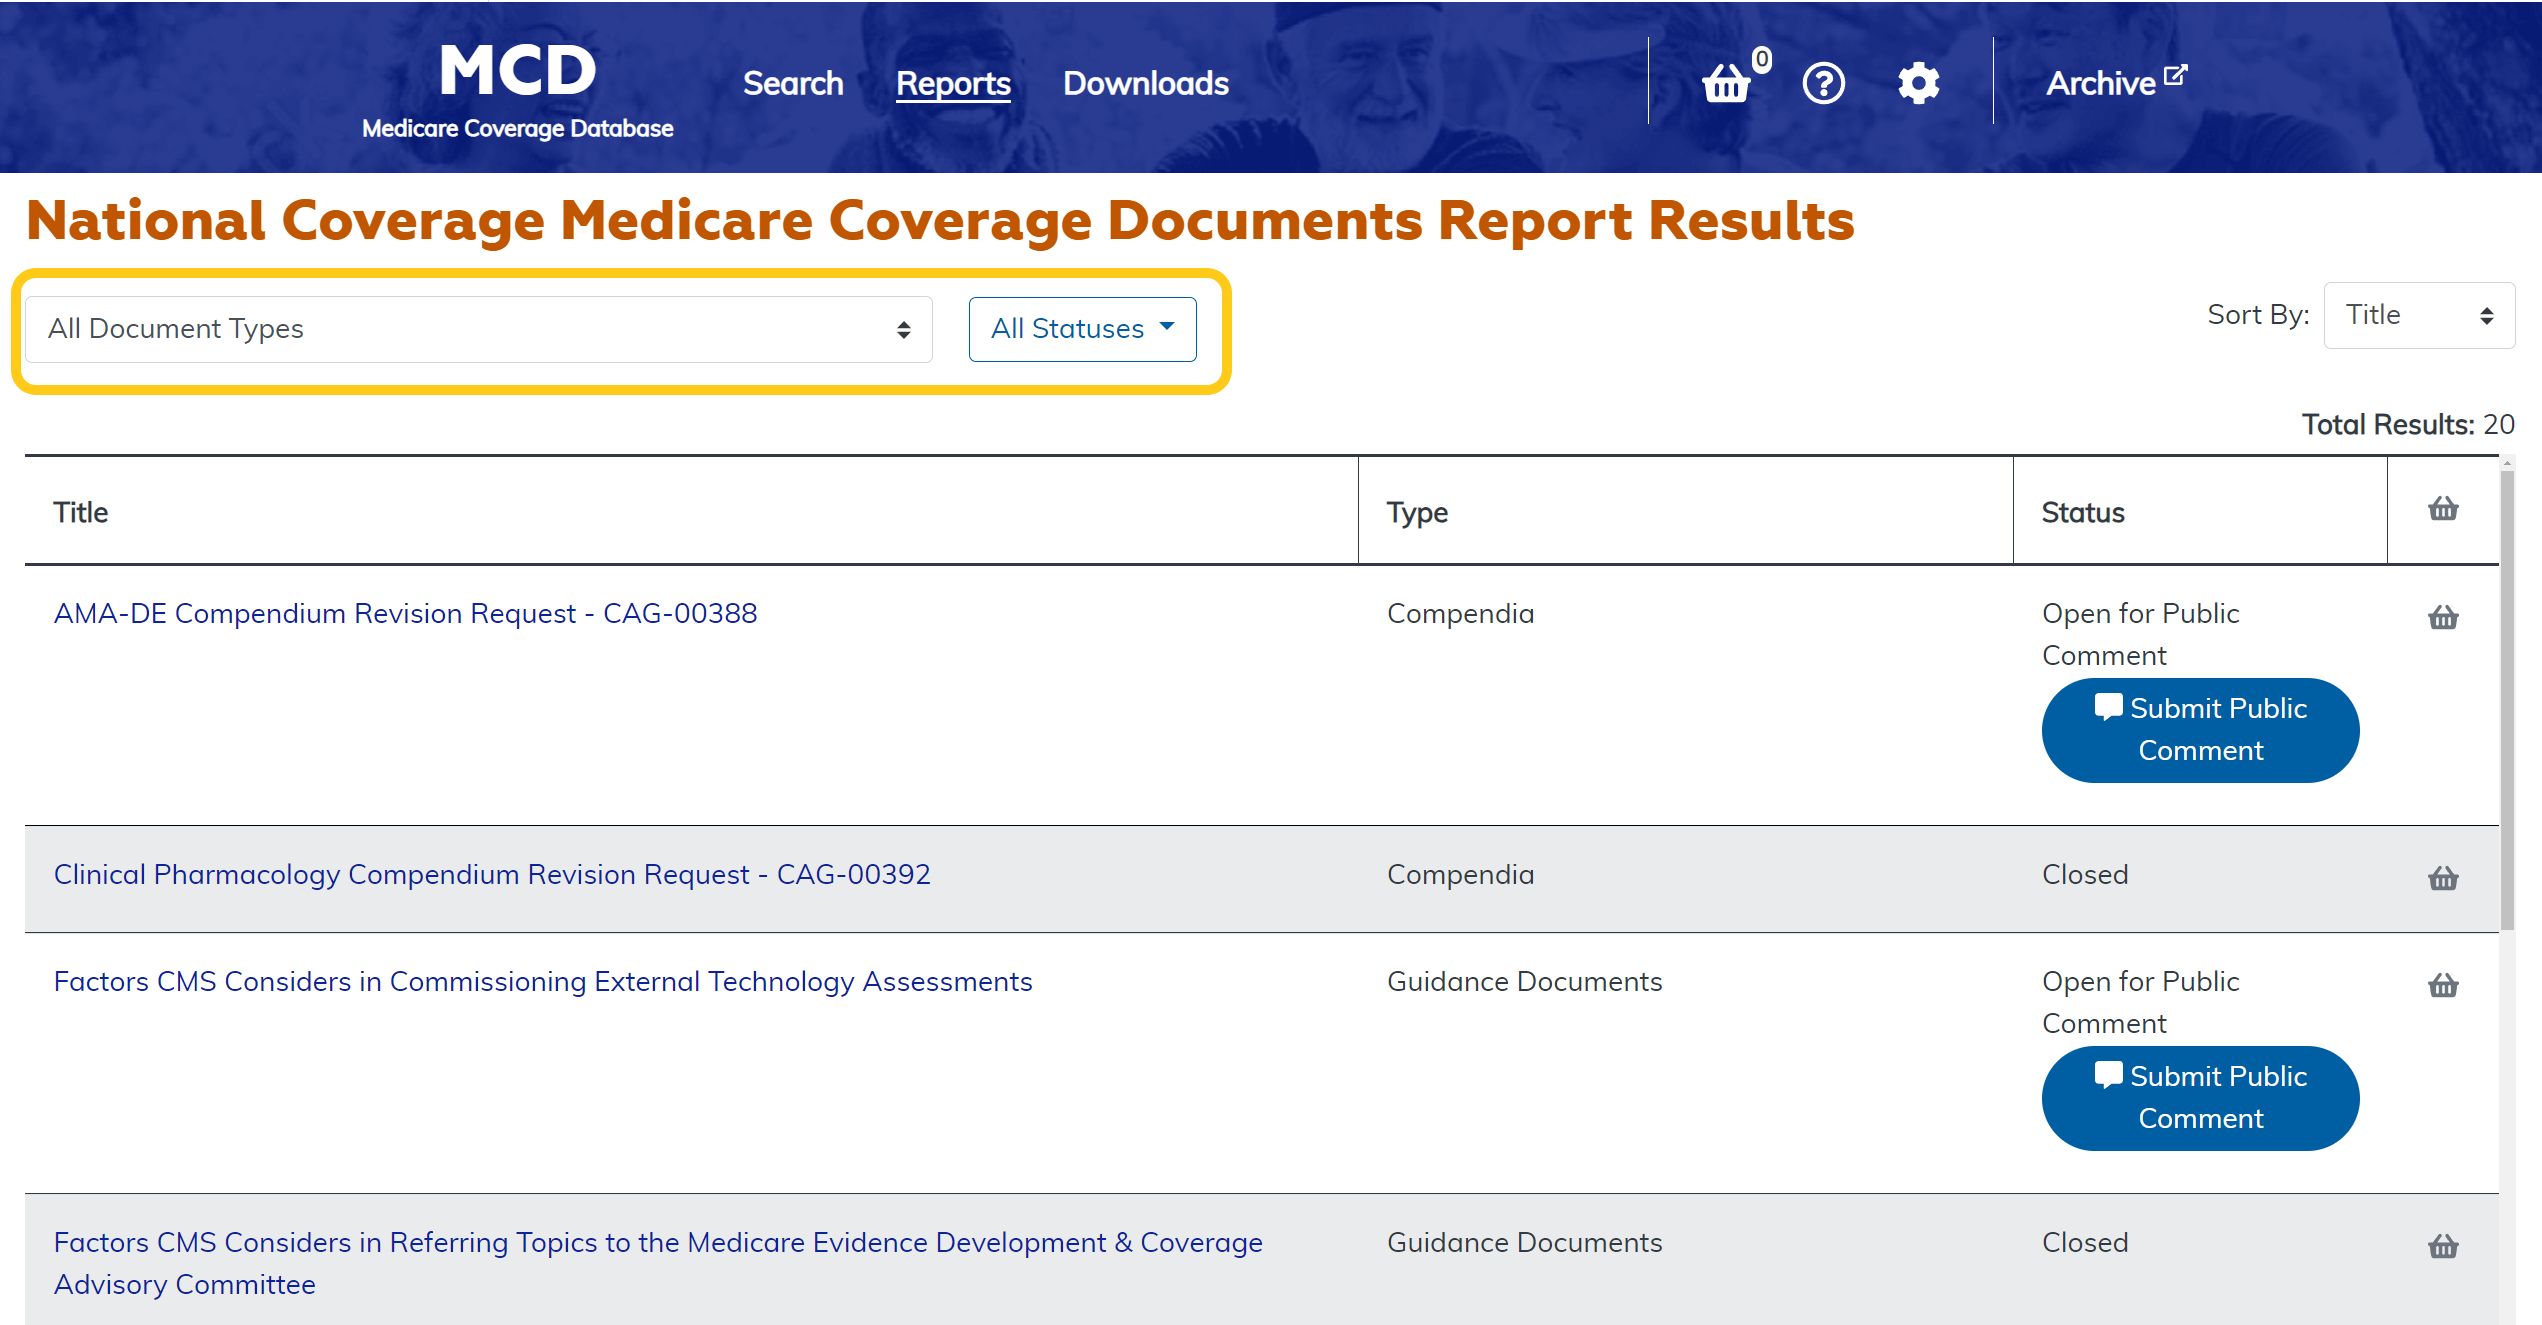 National Coverage Medicare Coverage Documents Report filter bar highlighted